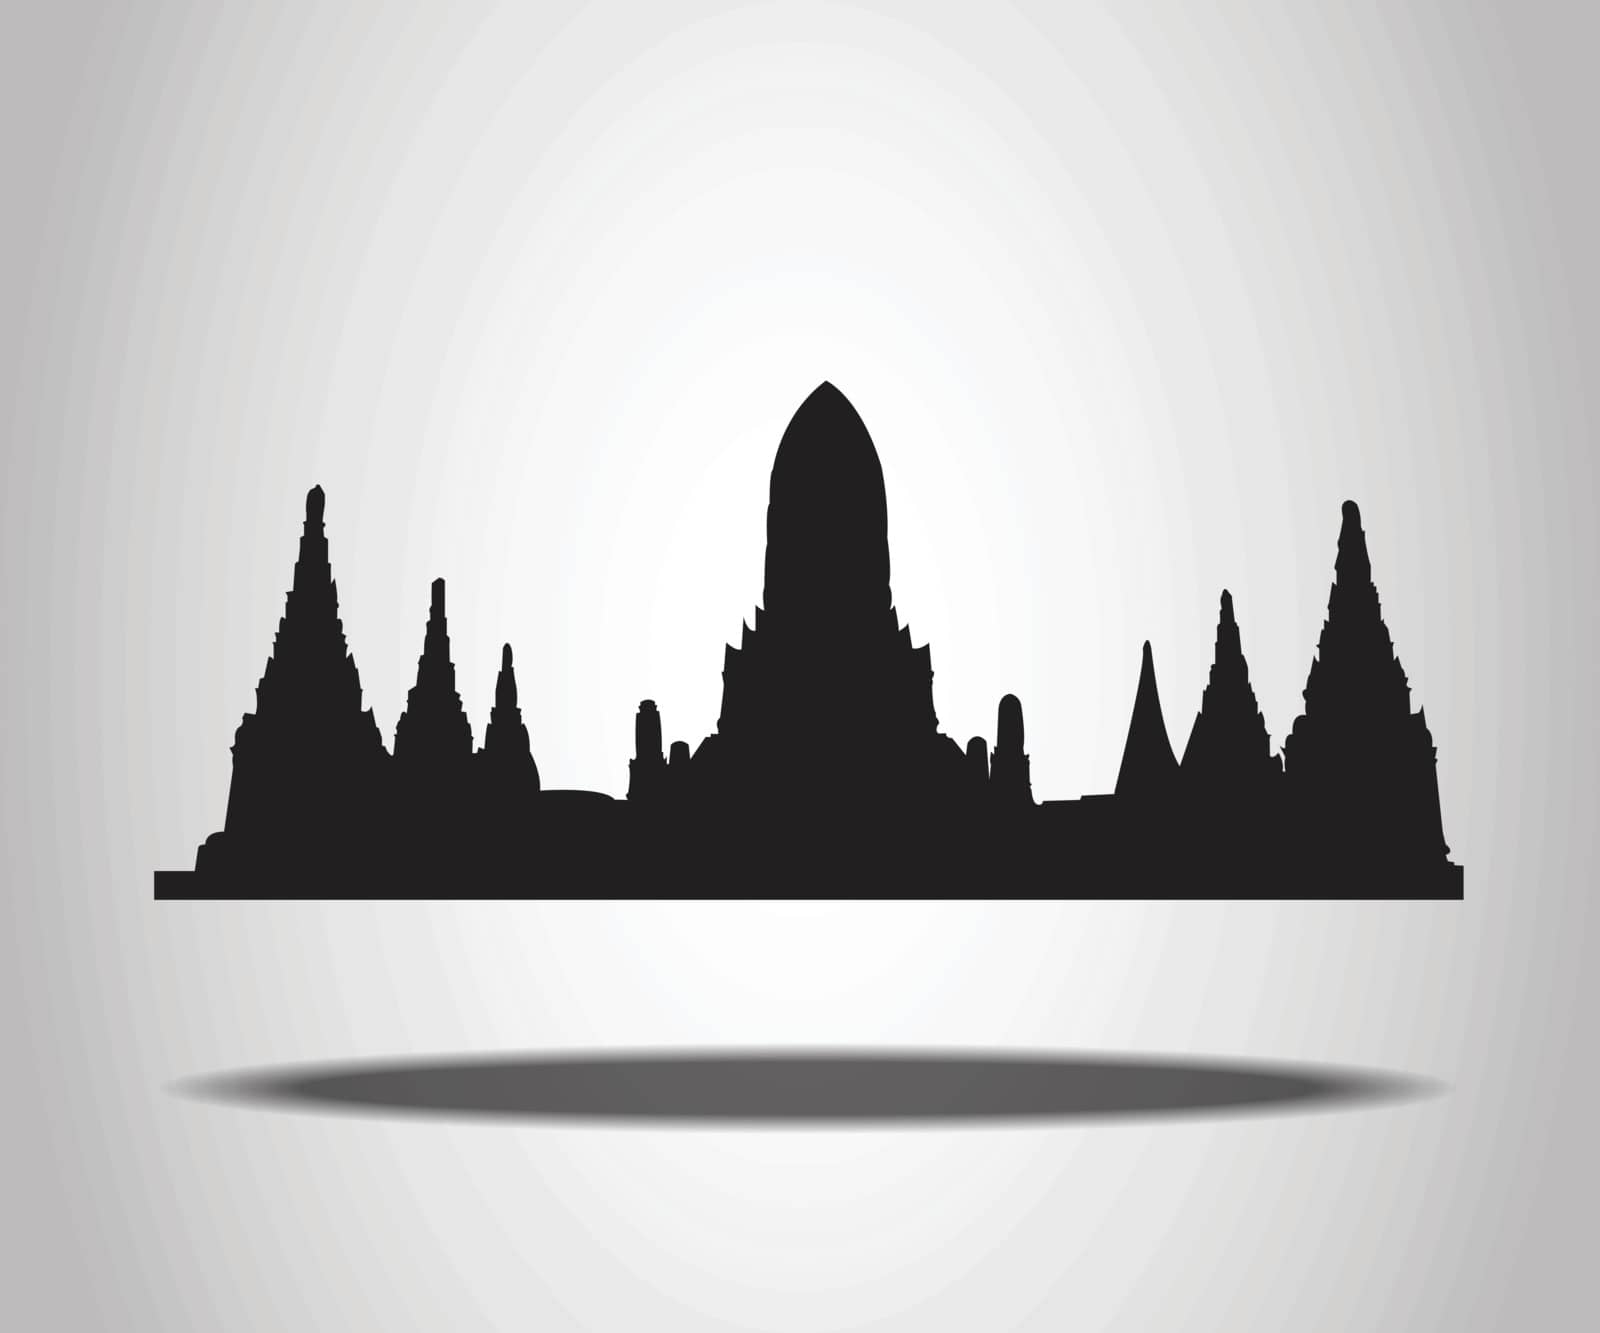 Thai Temple Silhouettes on the white background by doraclub